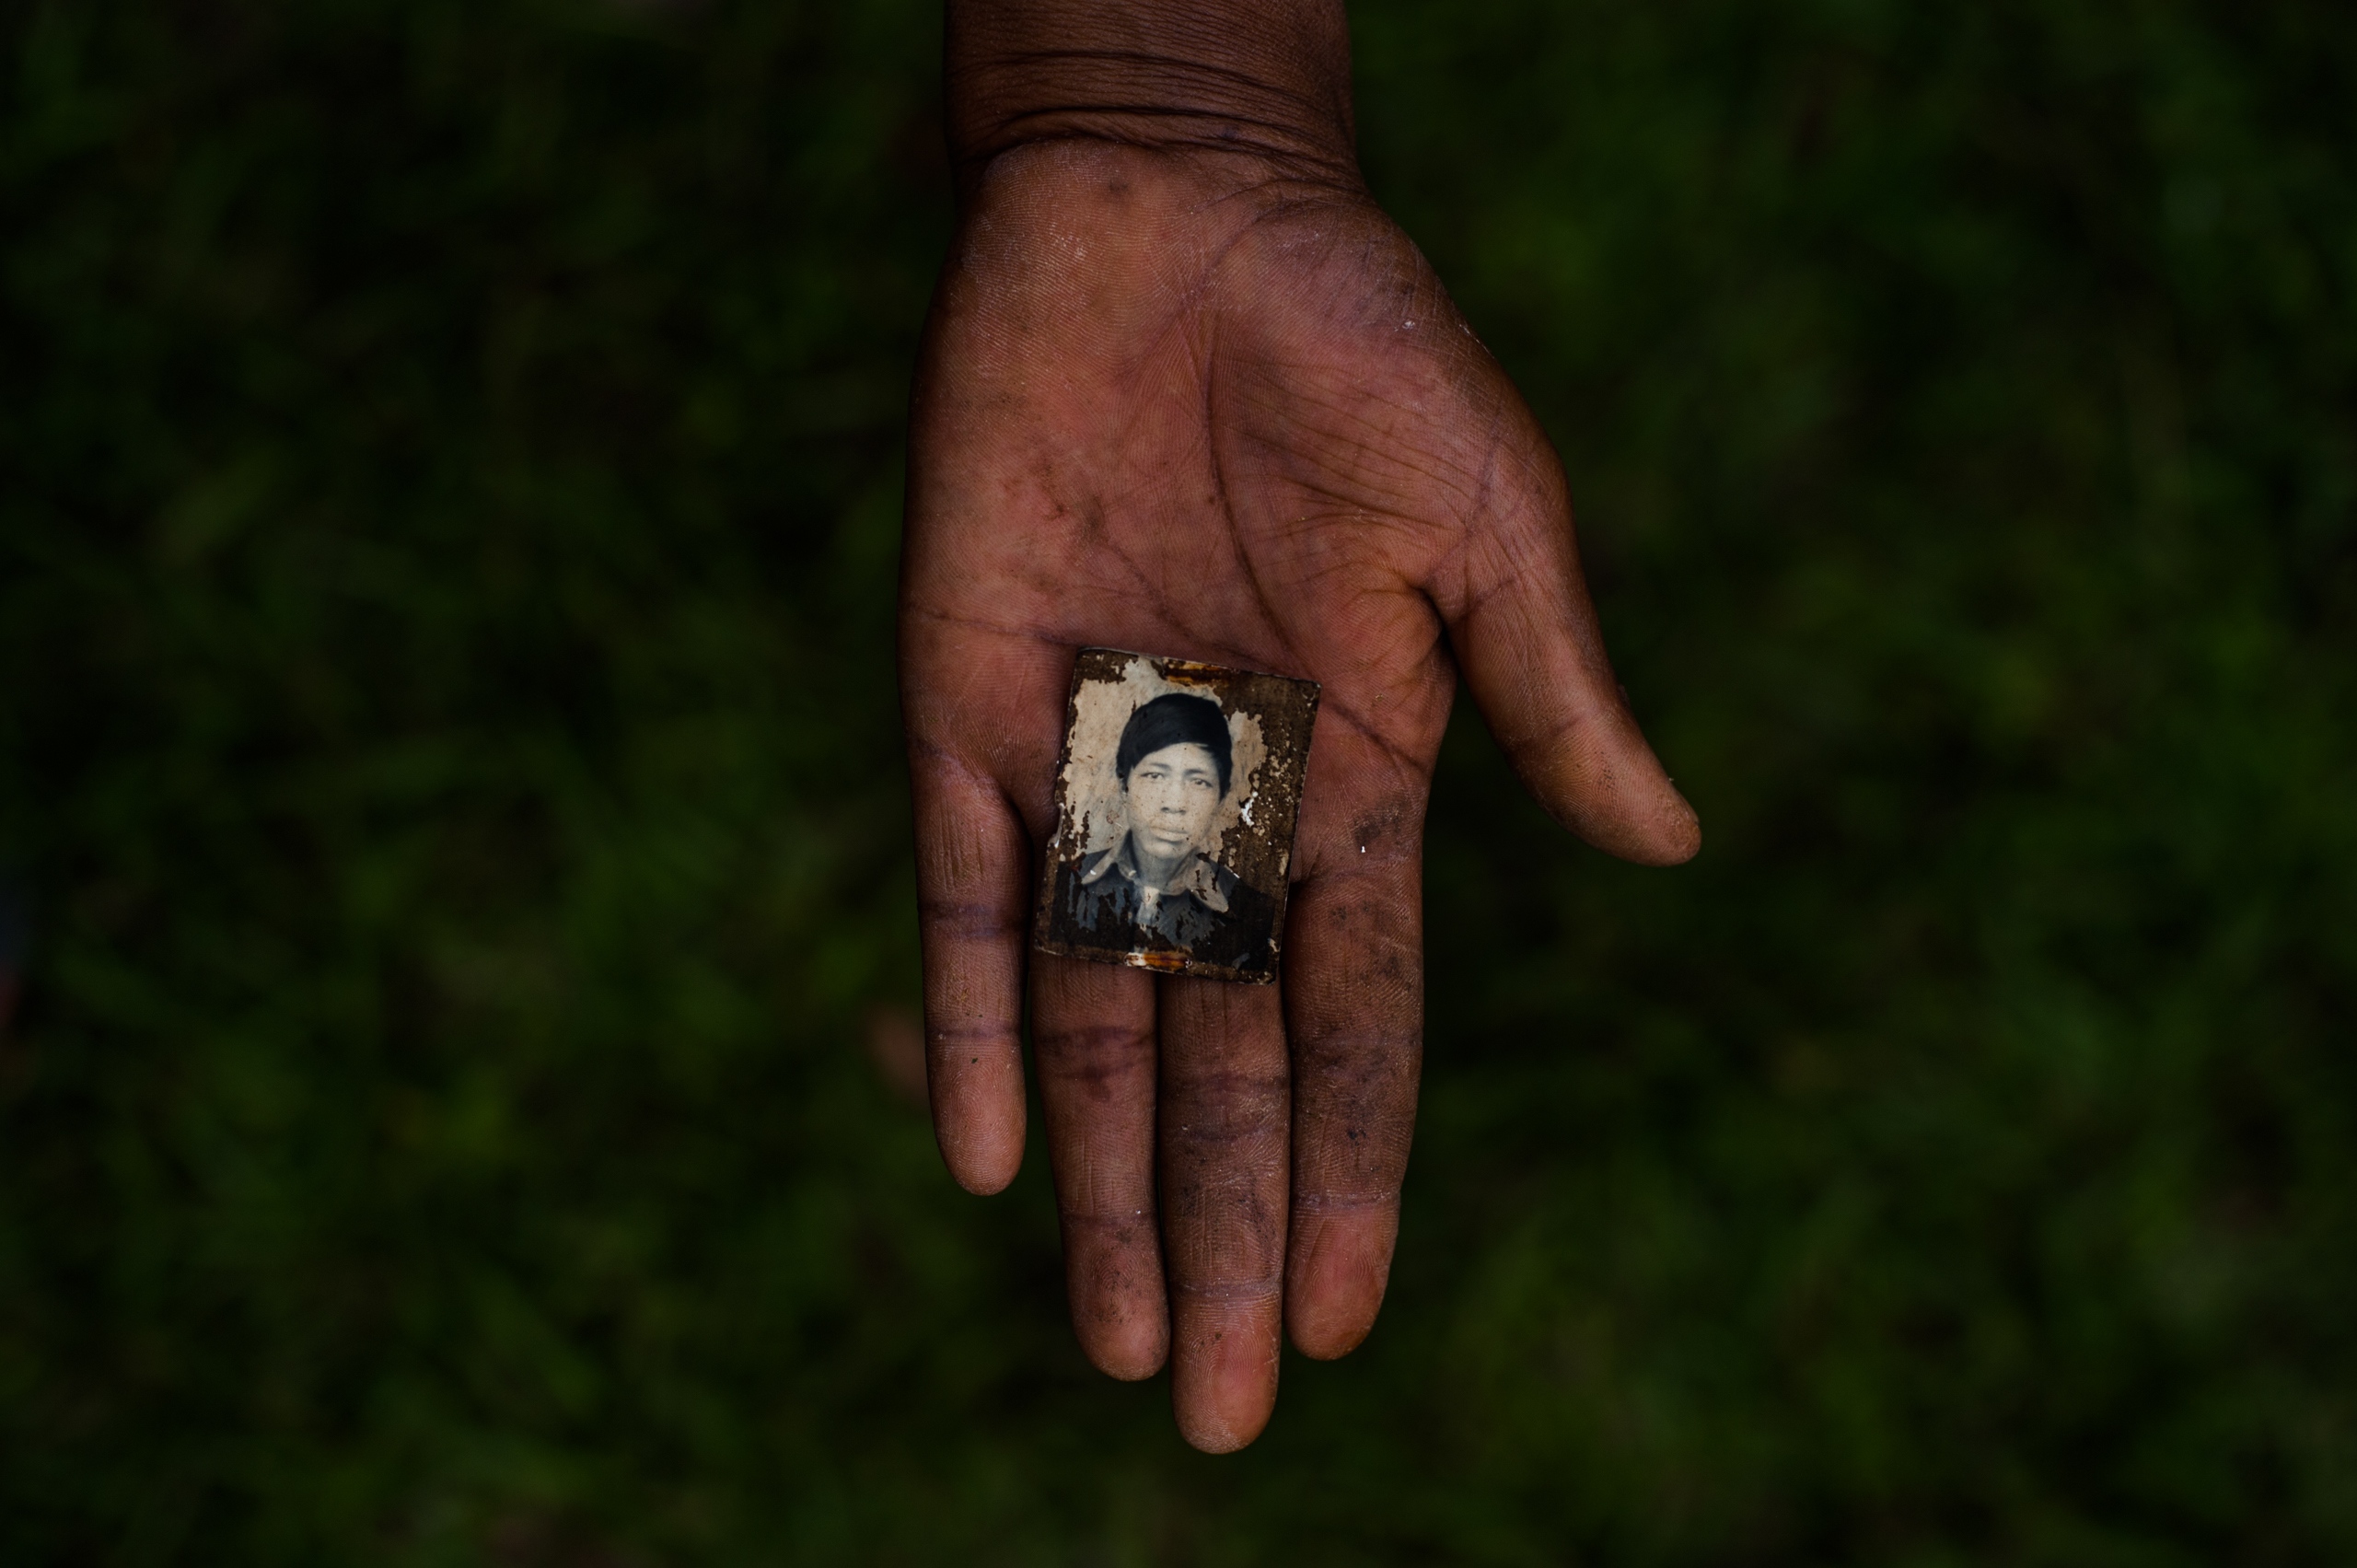 Domingo Rodriguez, 15. He accompanied his father to the Xolosinay military base in Cotzal to pick up a flag that they had to place on the roof of their house to prevent planes from bombarding it. He has been 'disappeared,' along with his father, since January 31, 1982.